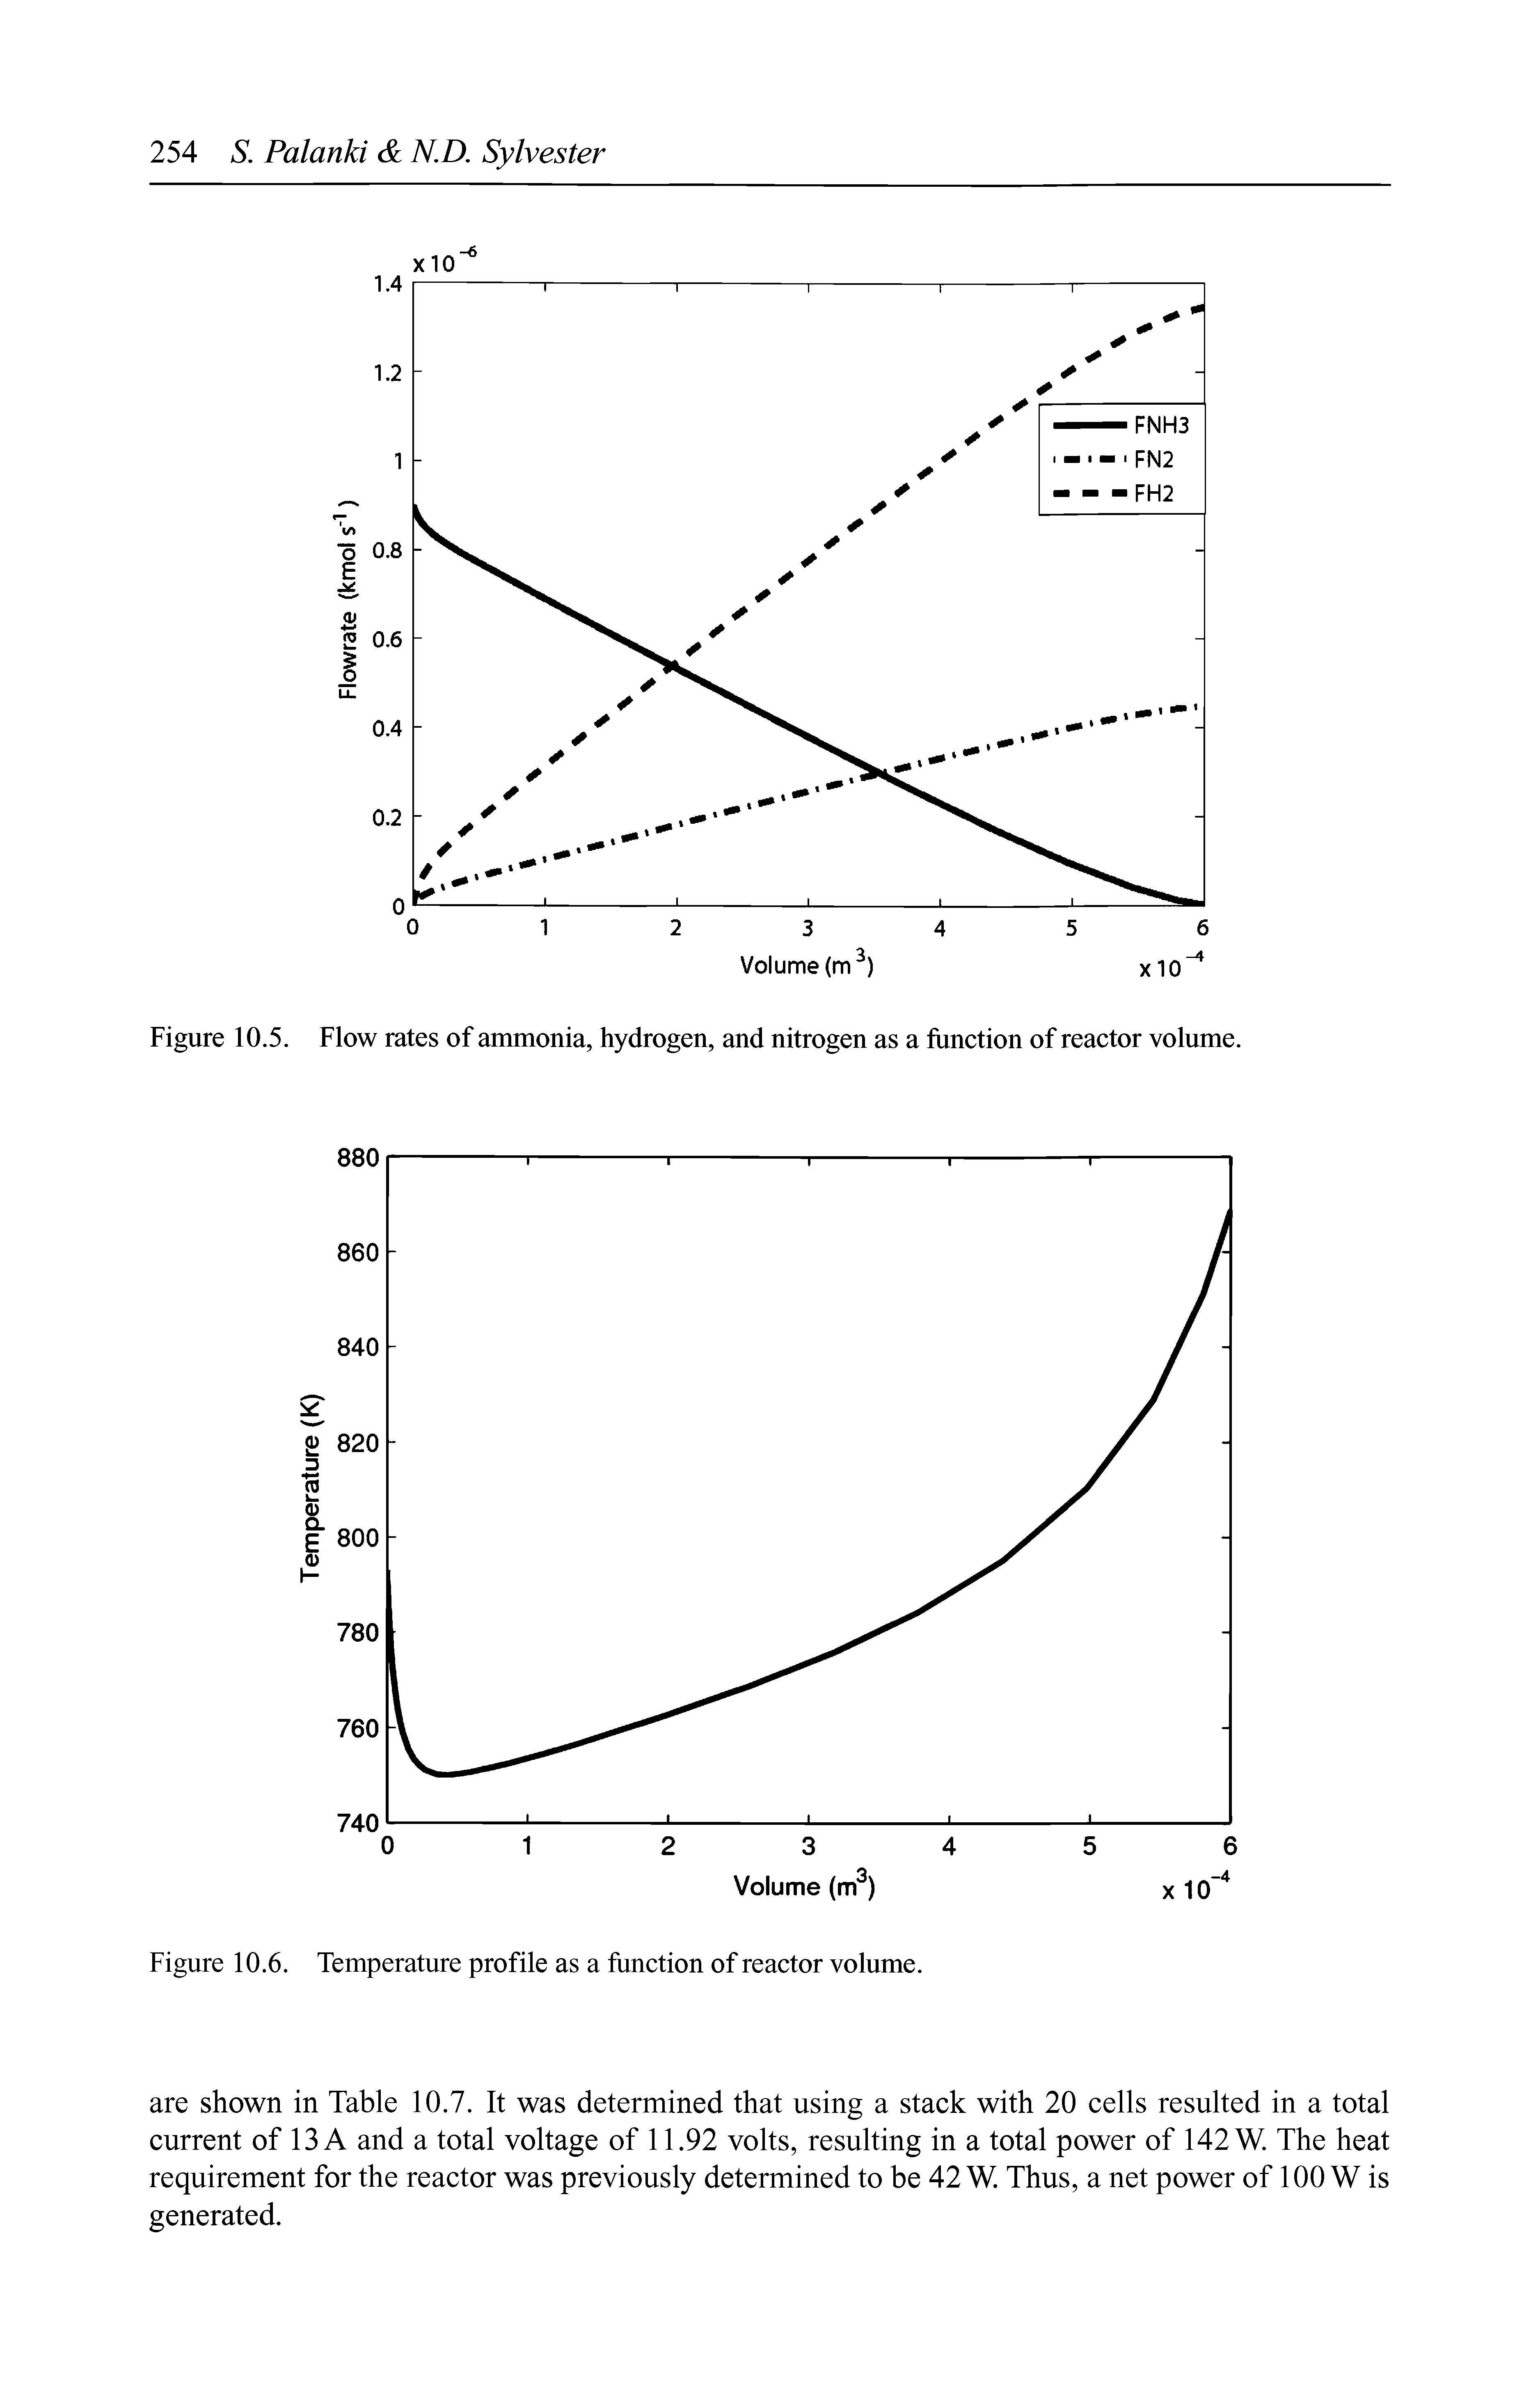 Figure 10.5. Flow rates of ammonia, hydrogen, and nitrogen as a function of reactor volume.